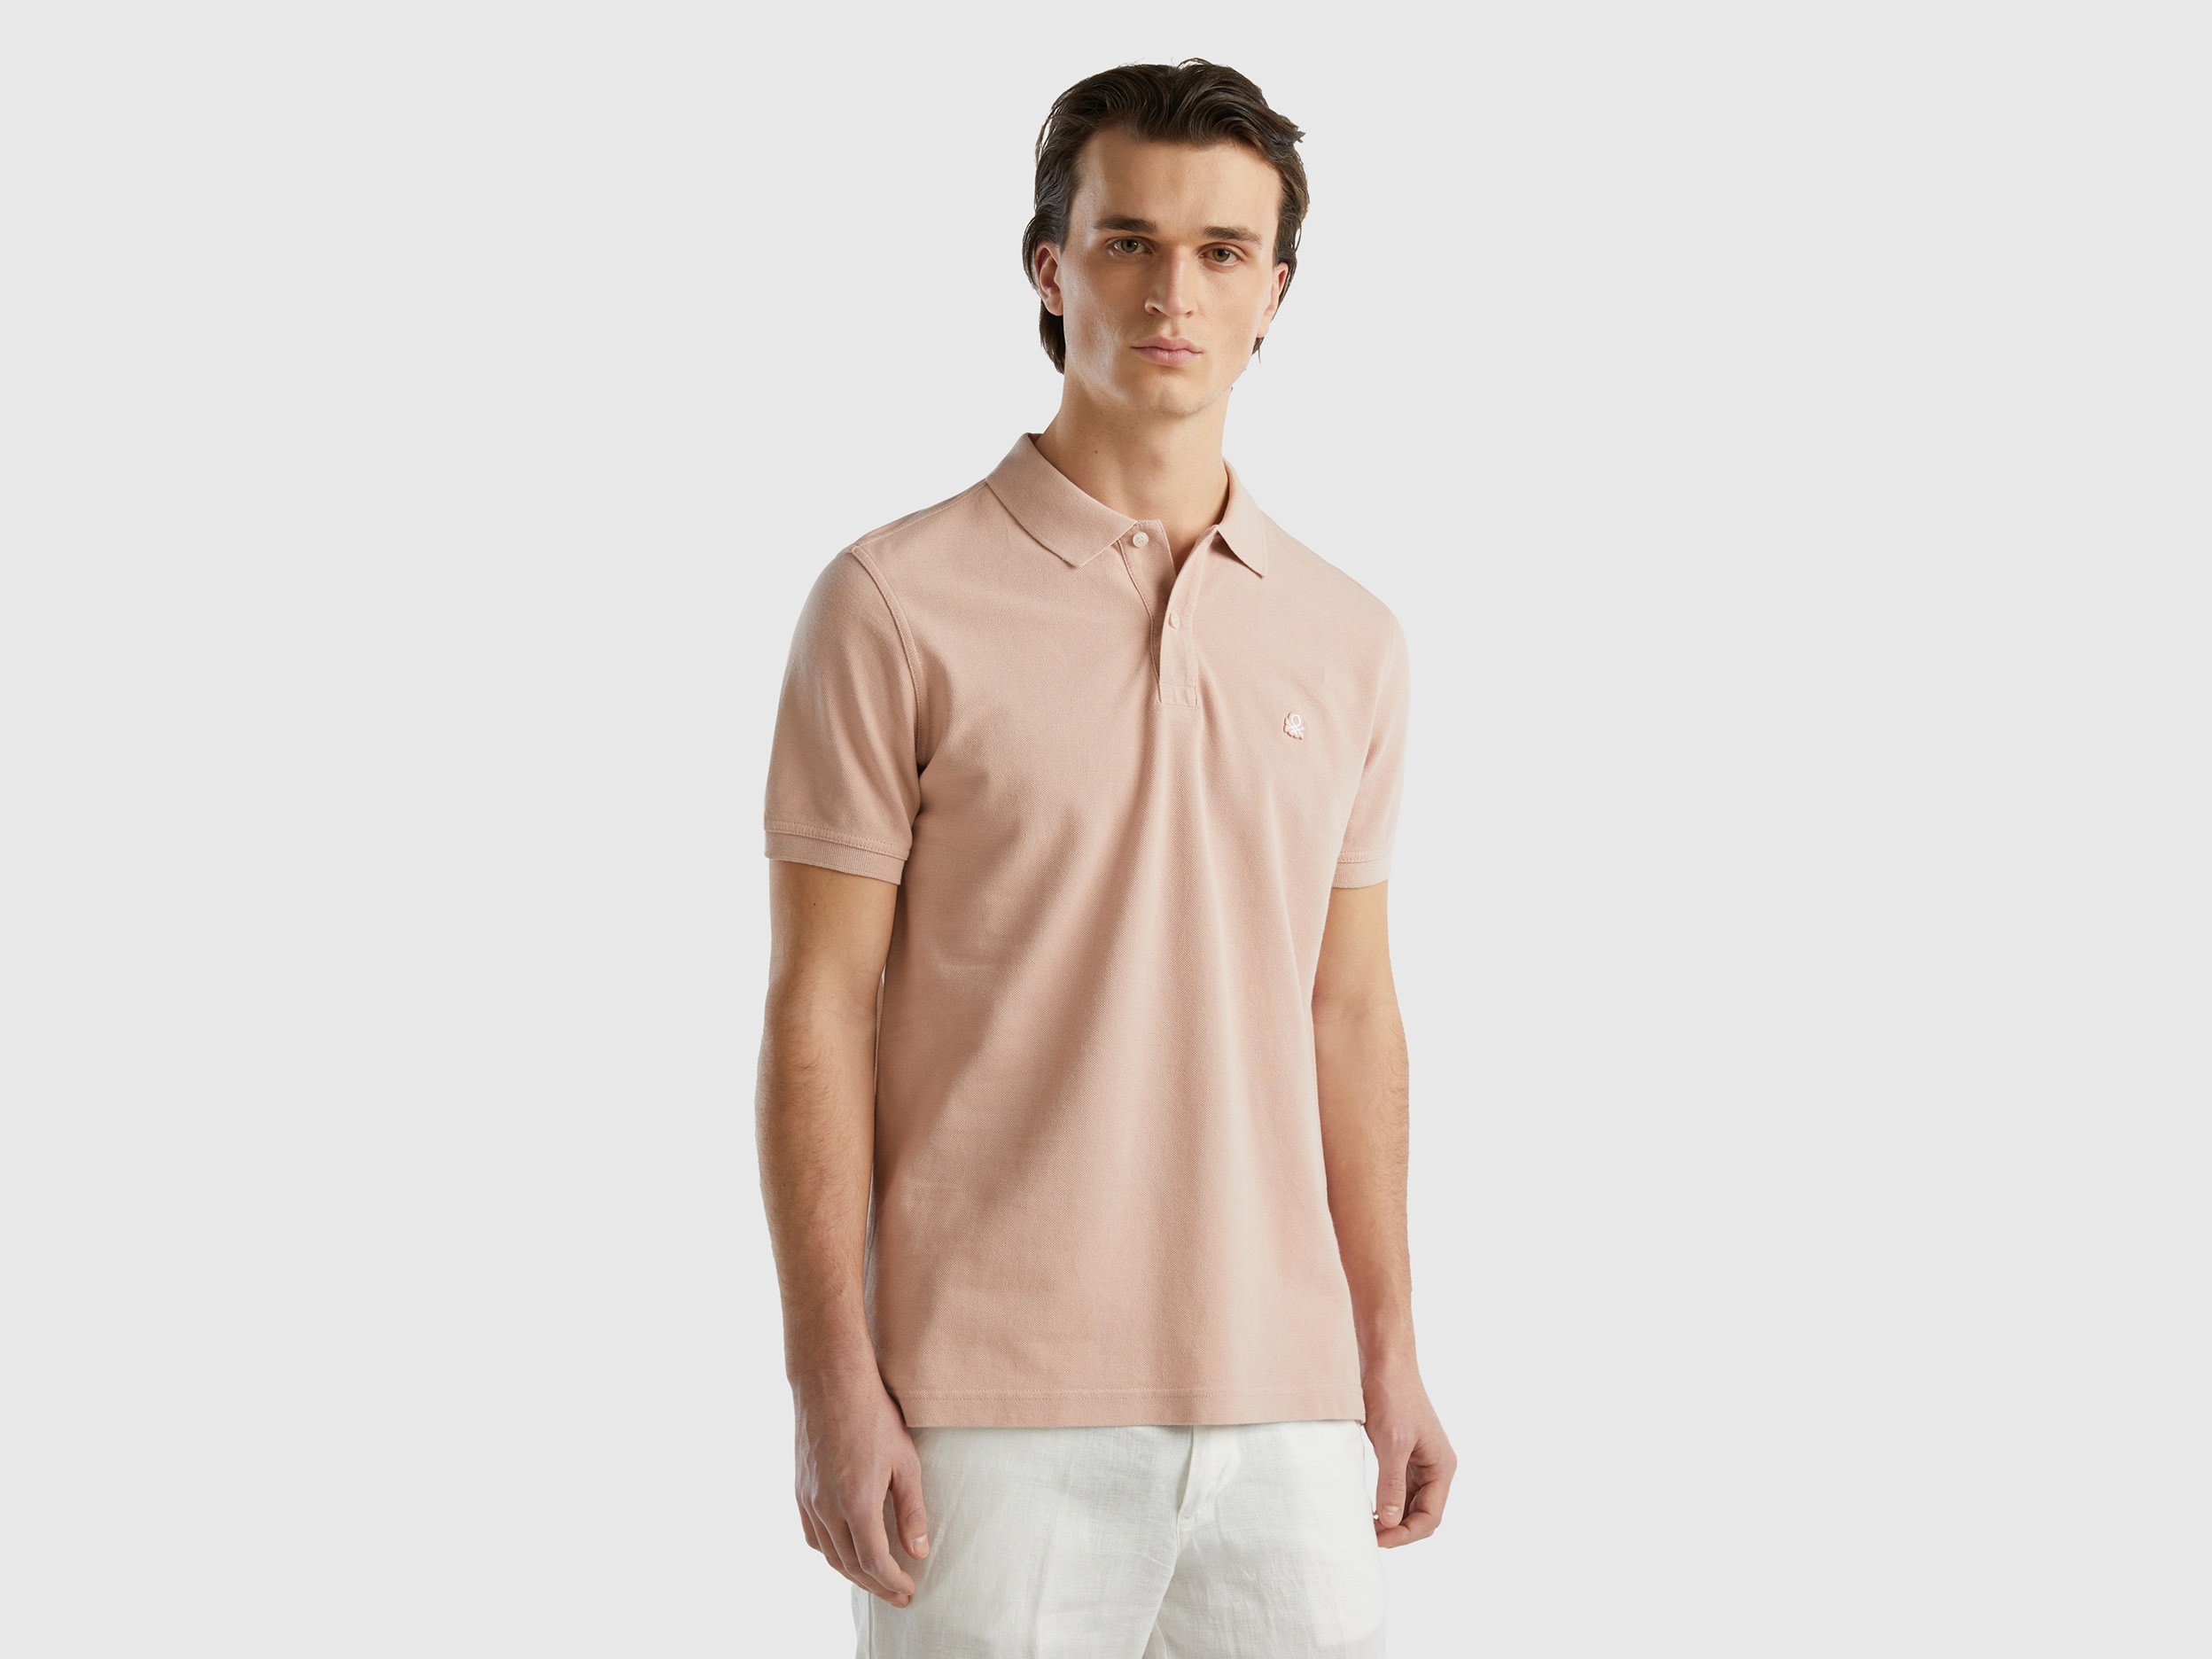 Image of Benetton, Soft Pink Regular Fit Polo, size XL, Soft Pink, Men